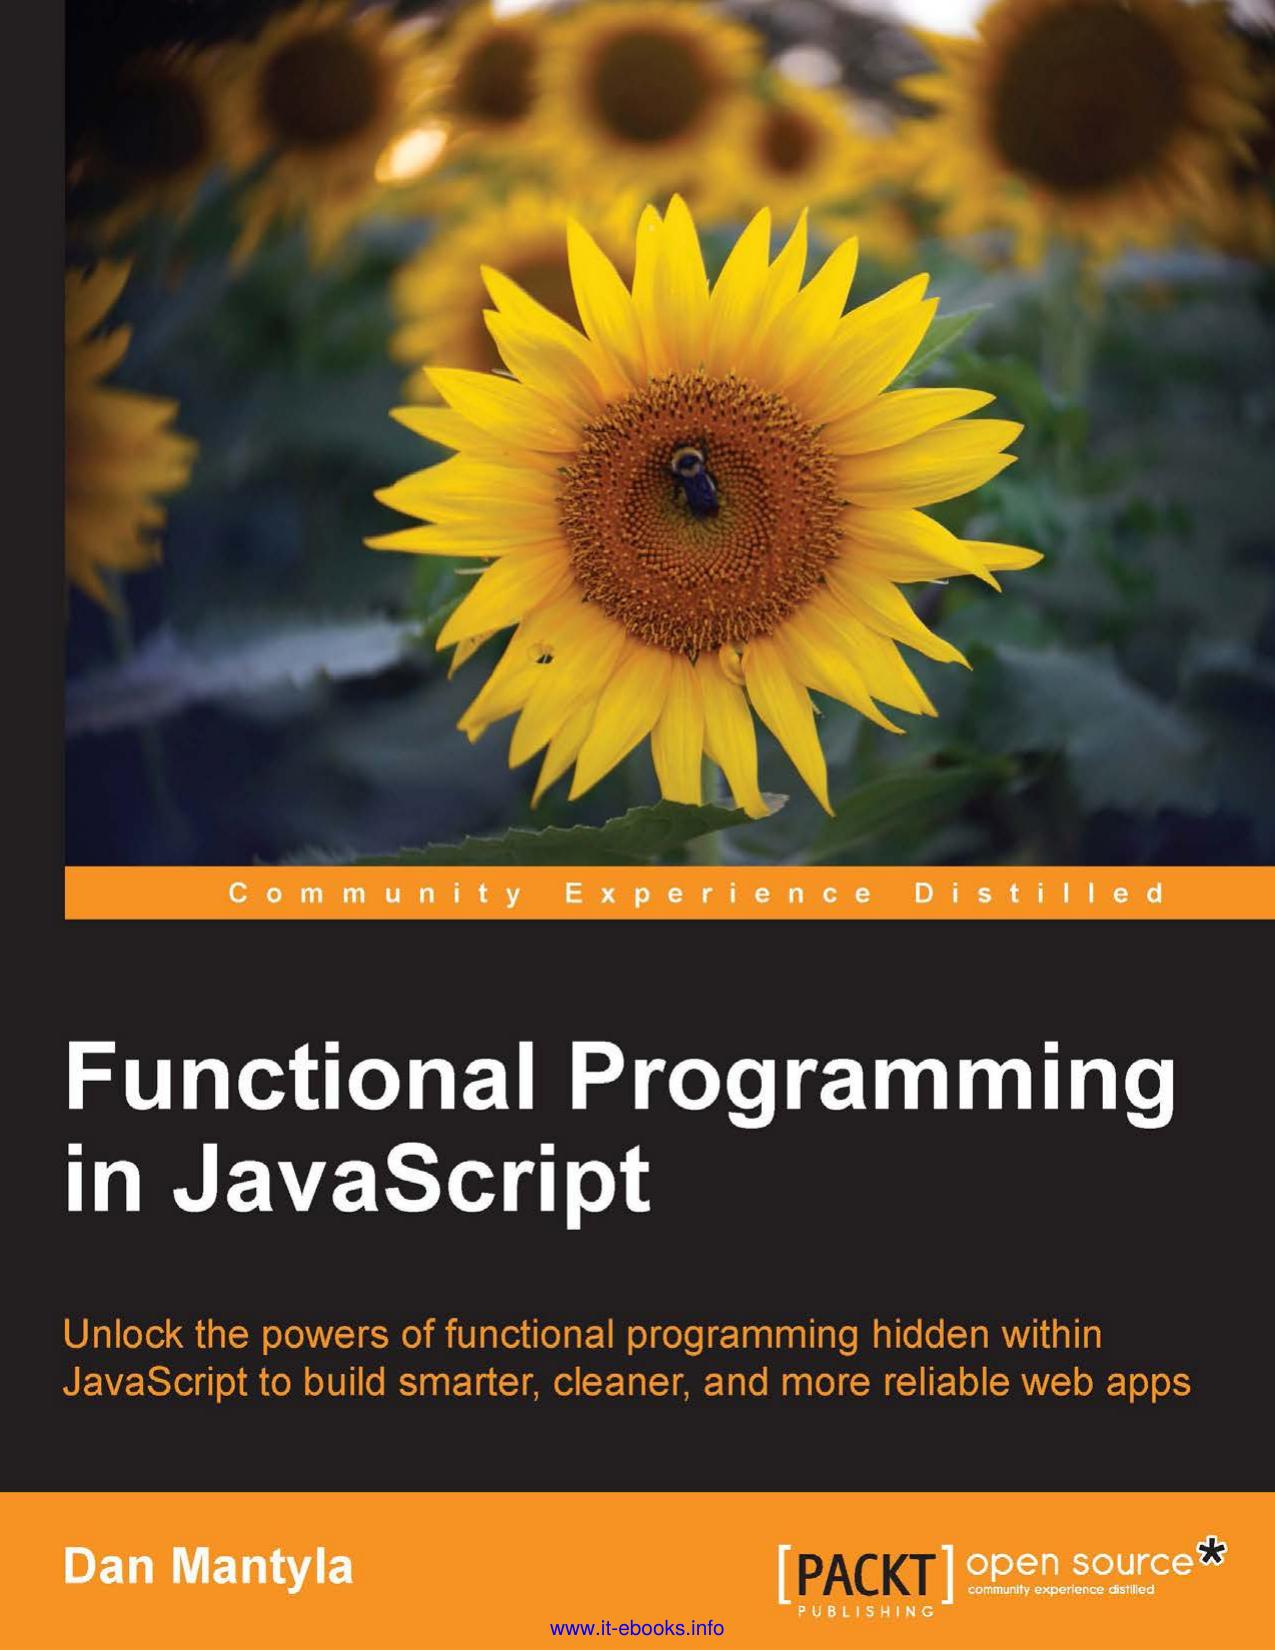 Functional Programming in JavaScript by Unknown